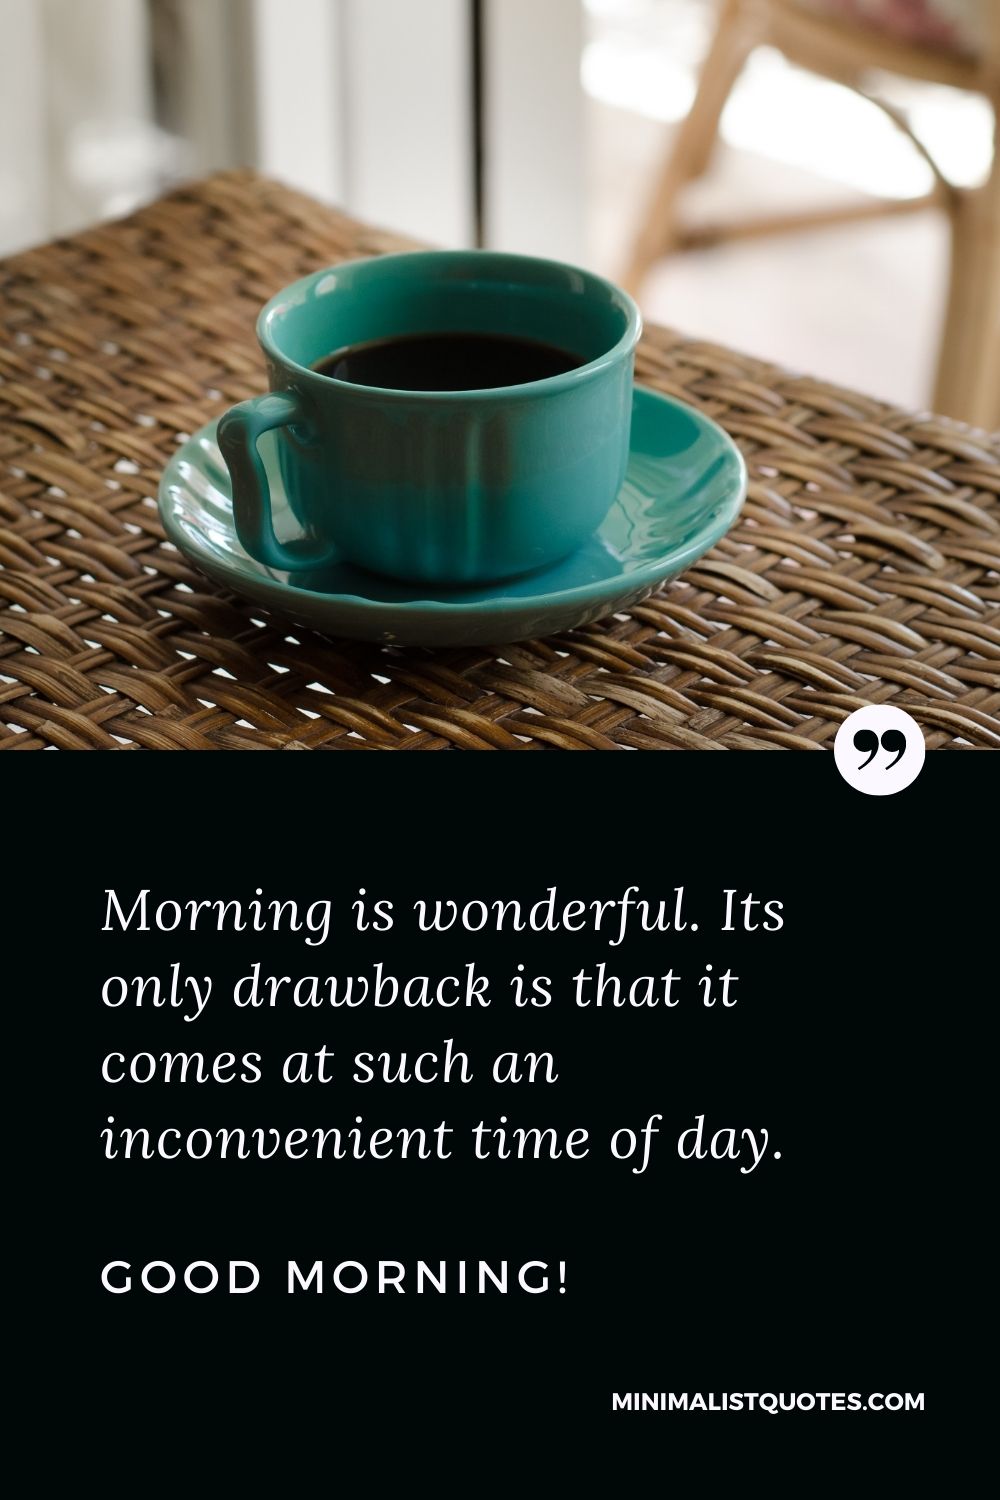 Good Morning Quote, Wish & Message With Image: Morning is wonderful. Its only drawback is that it comes at such an inconvenient time of day. Good Morning!